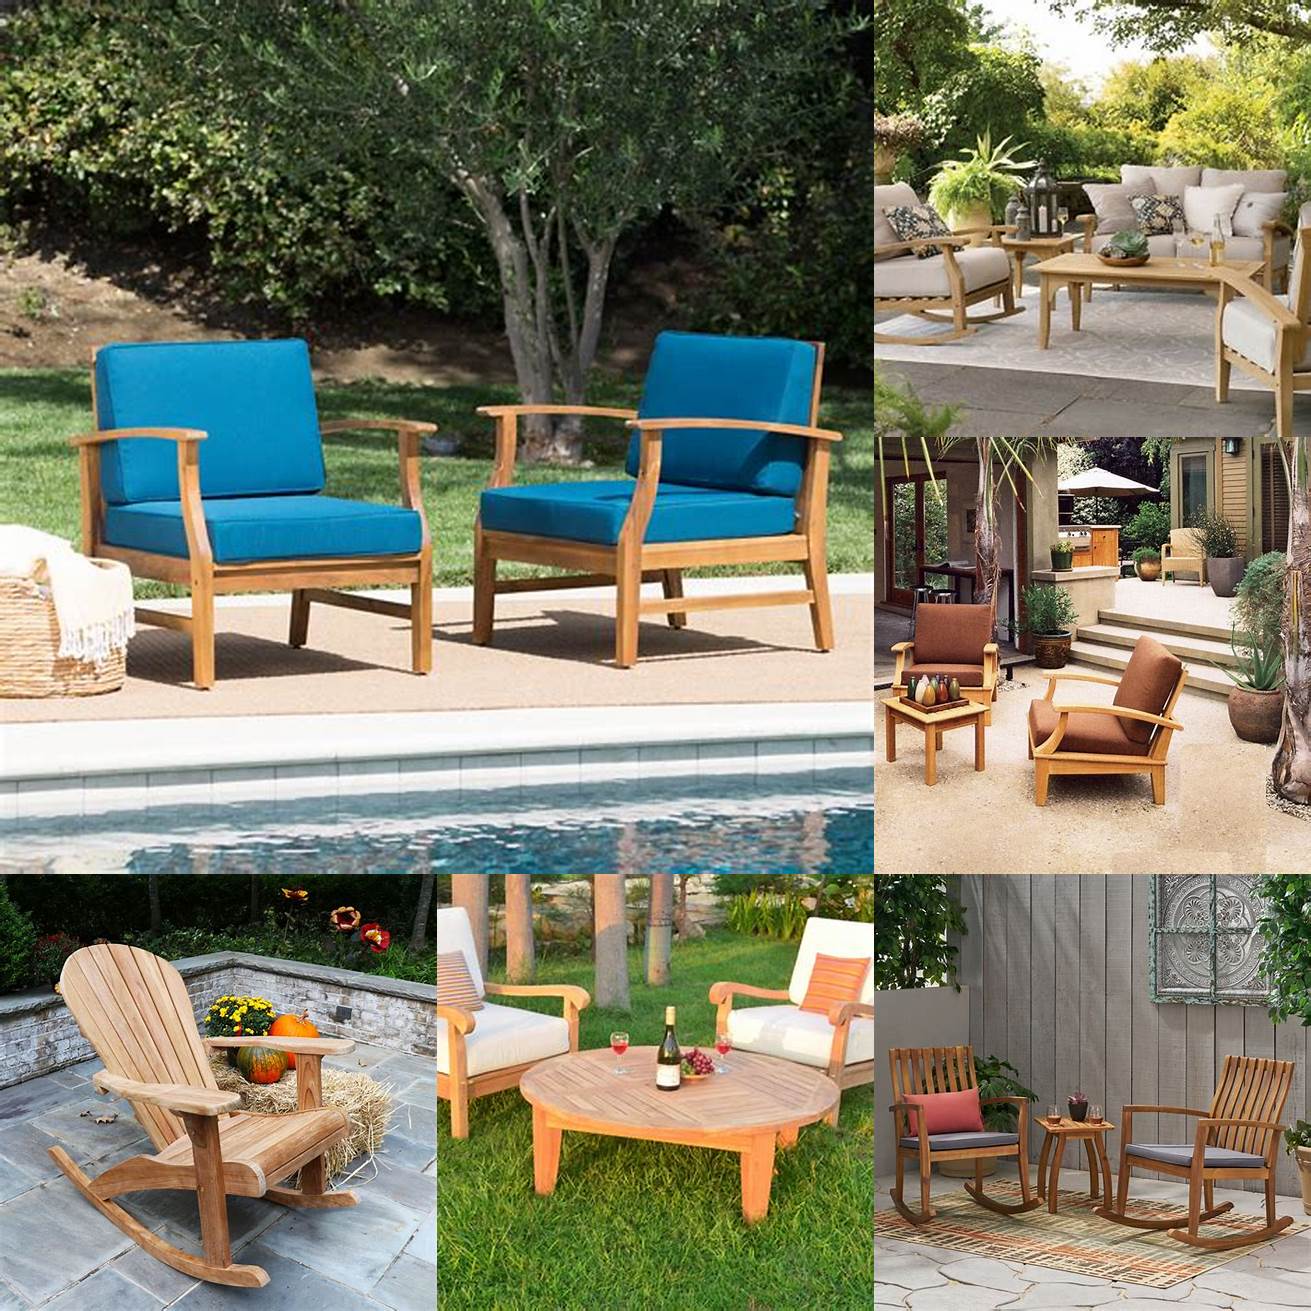 A picture of an outdoor living space with multiple teak rocking chairs